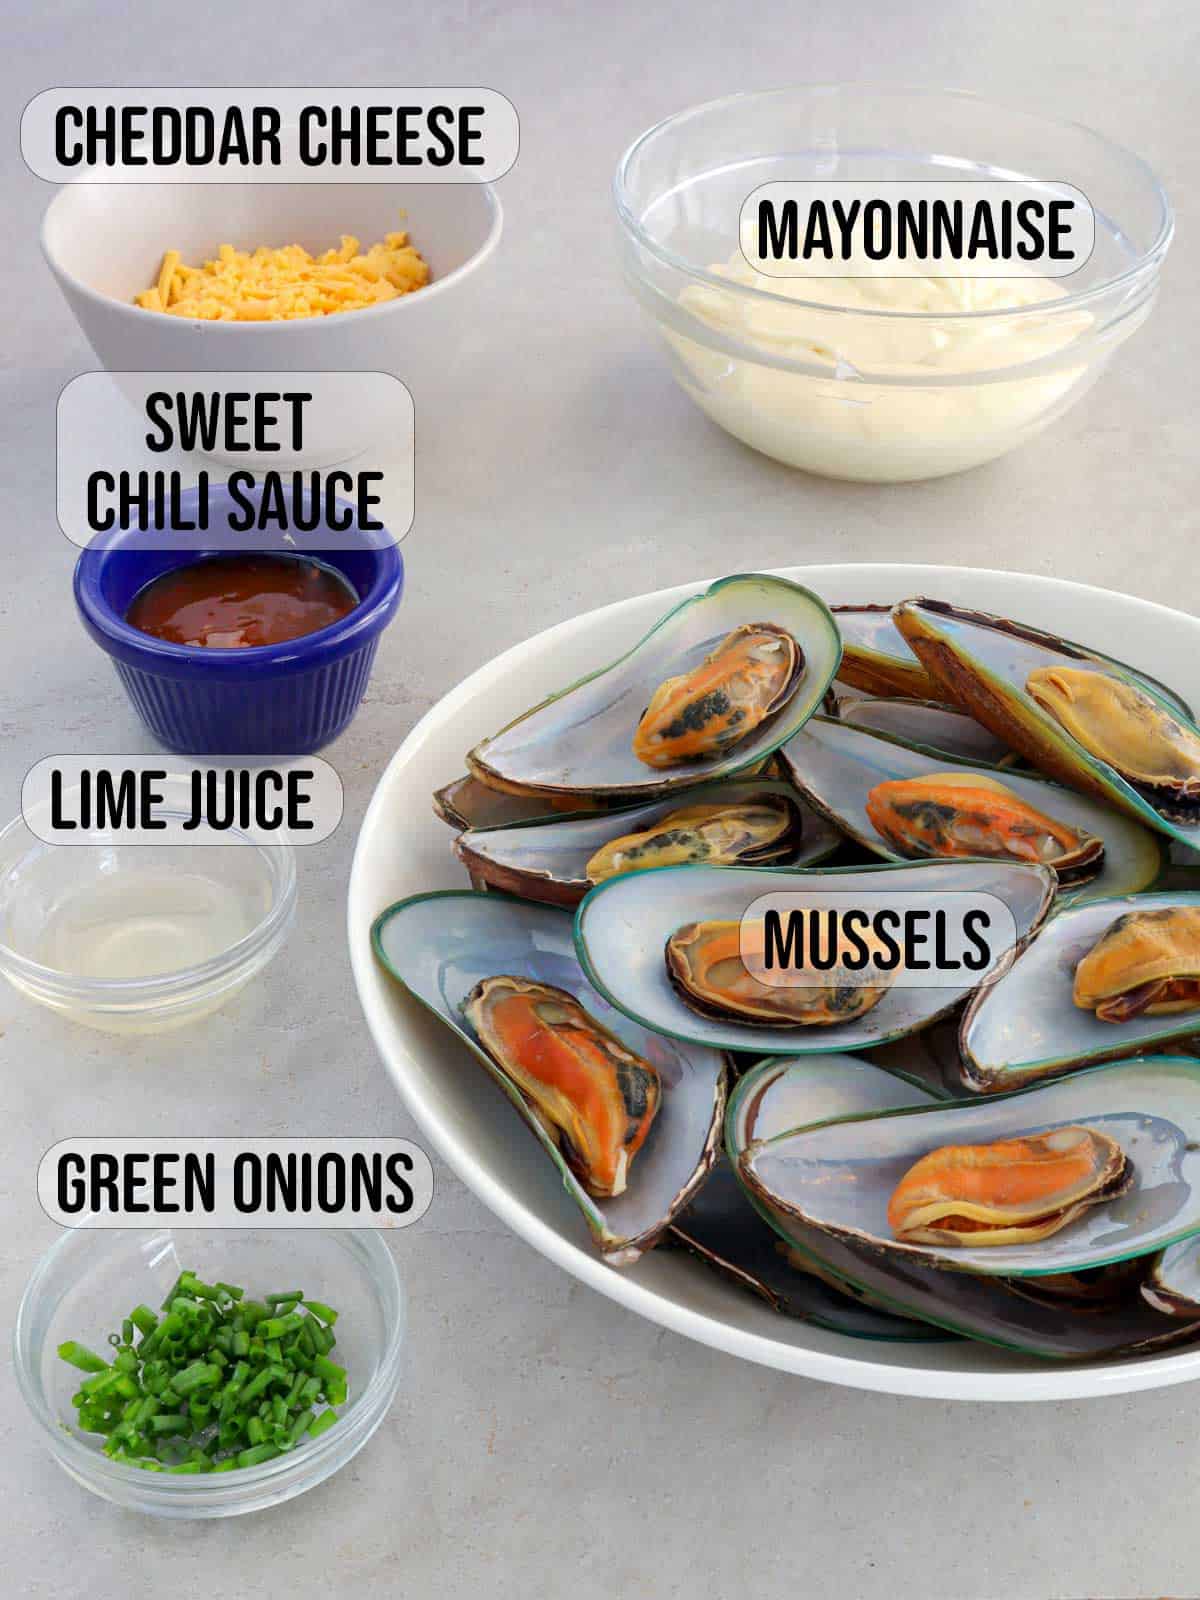 mussels, green onions, sweet chili sauce, mayonnaise, shredded cheese, lime juice in bowls.